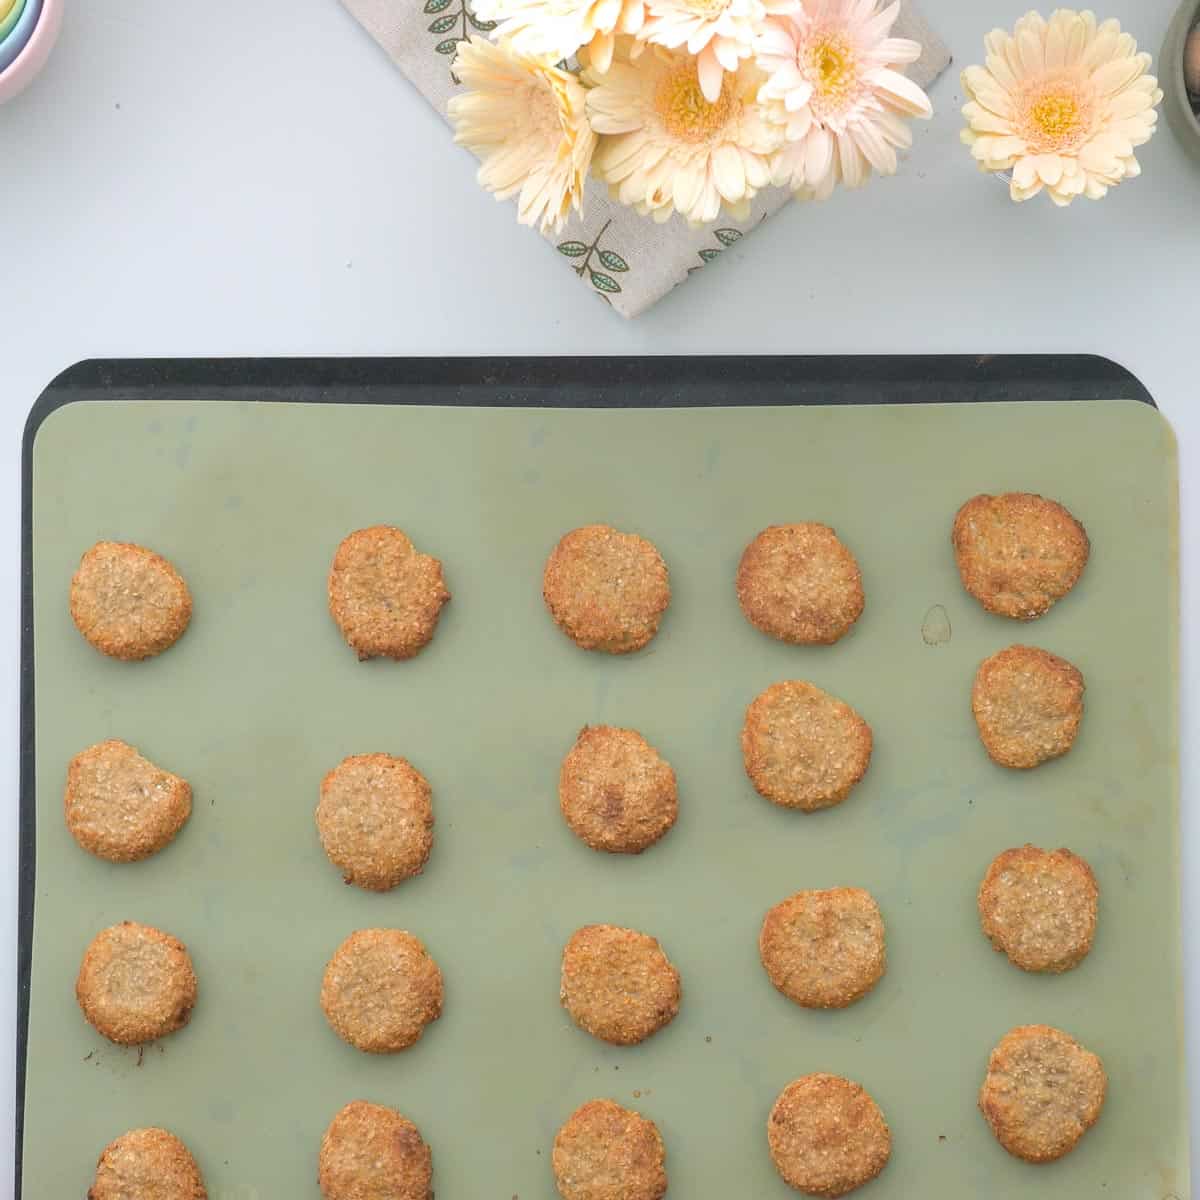 Golden brown oatmeal cookies on a lined cookie sheet.
